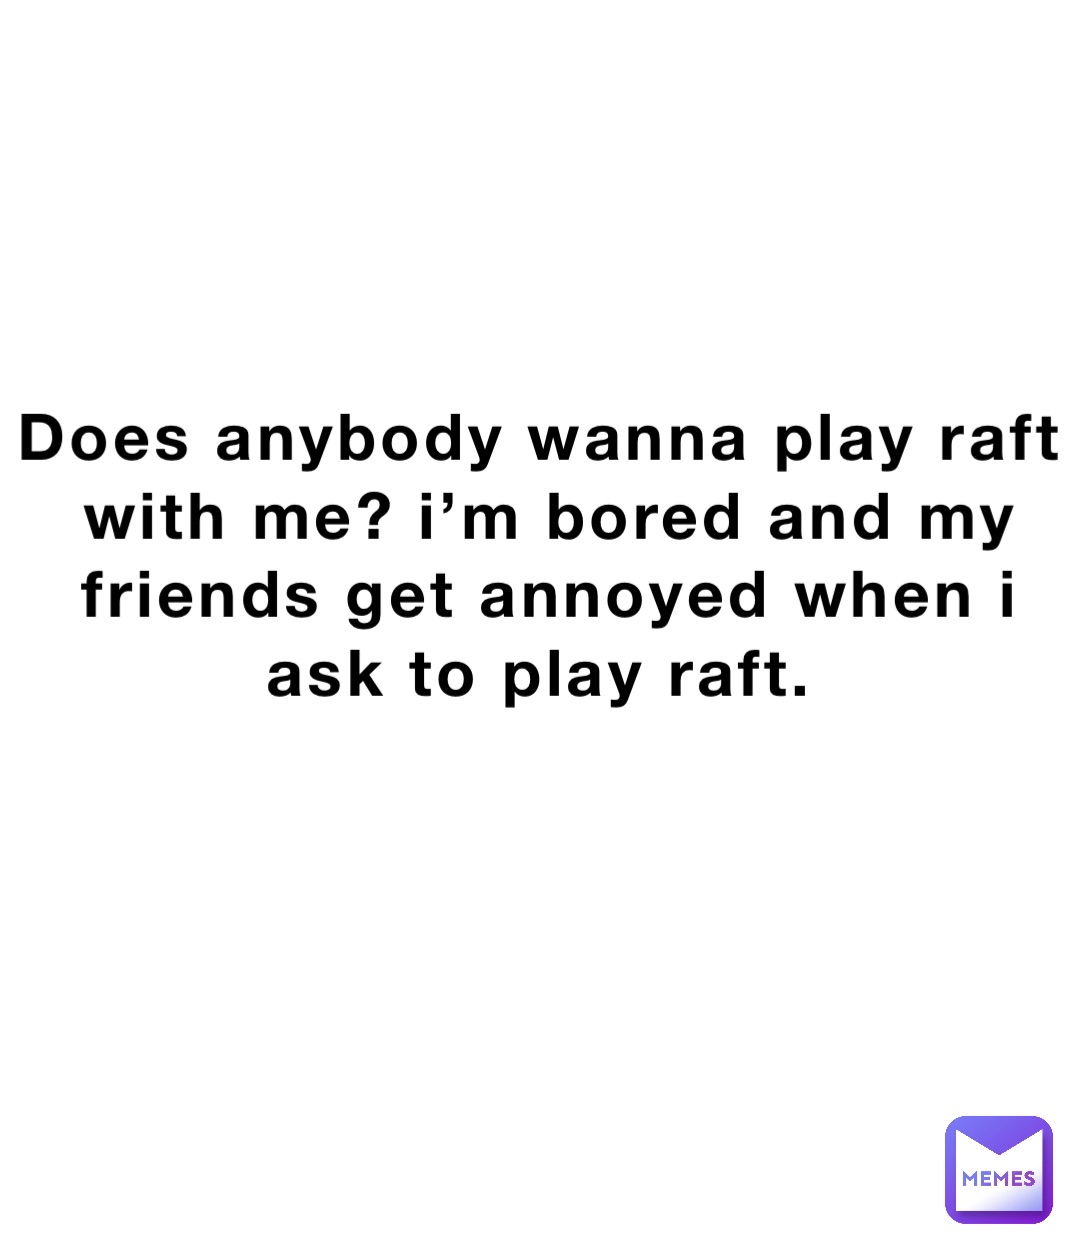 Does anybody wanna play raft with me? I’m bored and my friends get annoyed when I ask to play raft.